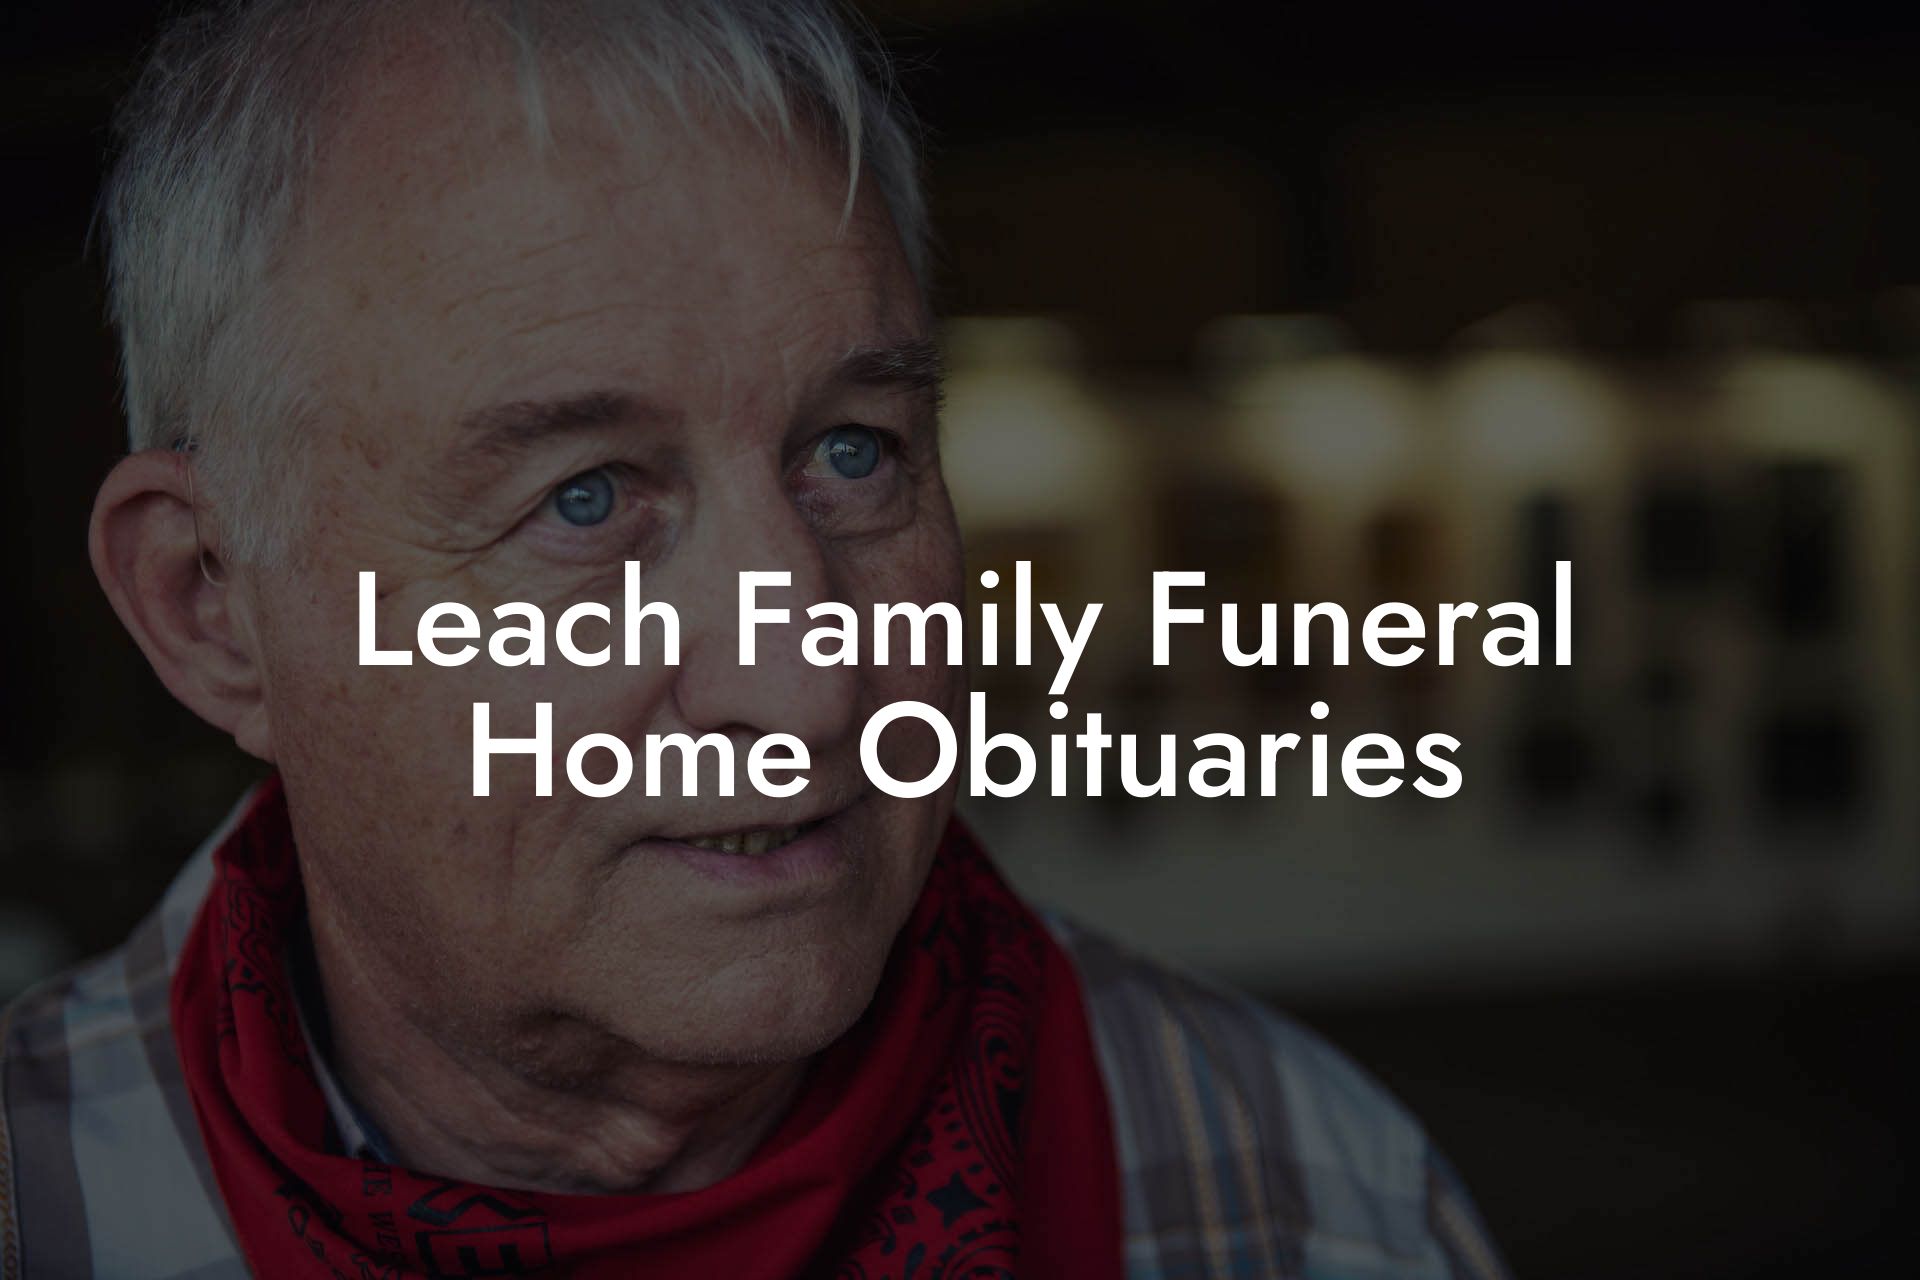 Leach Family Funeral Home Obituaries